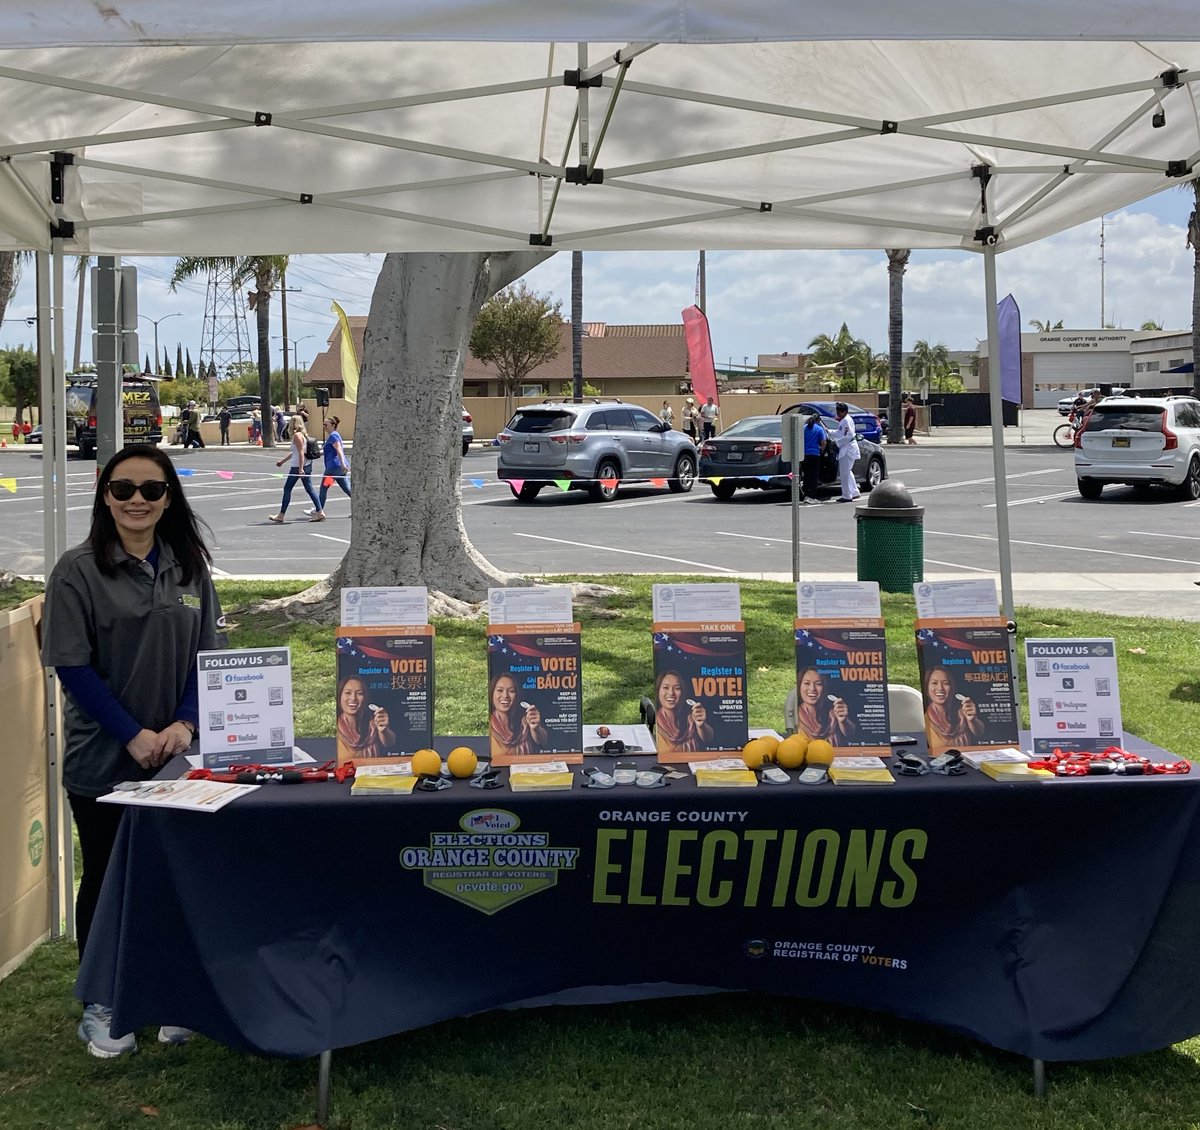 The 2024 Presidential General Election is just around the corner! Visit us at any of our upcoming events to receive trusted election information. Our team is ready to assist! To see our calendar of events, visit: ocvote.gov/community #2024Election #CommunityOutreach #OCVOTE